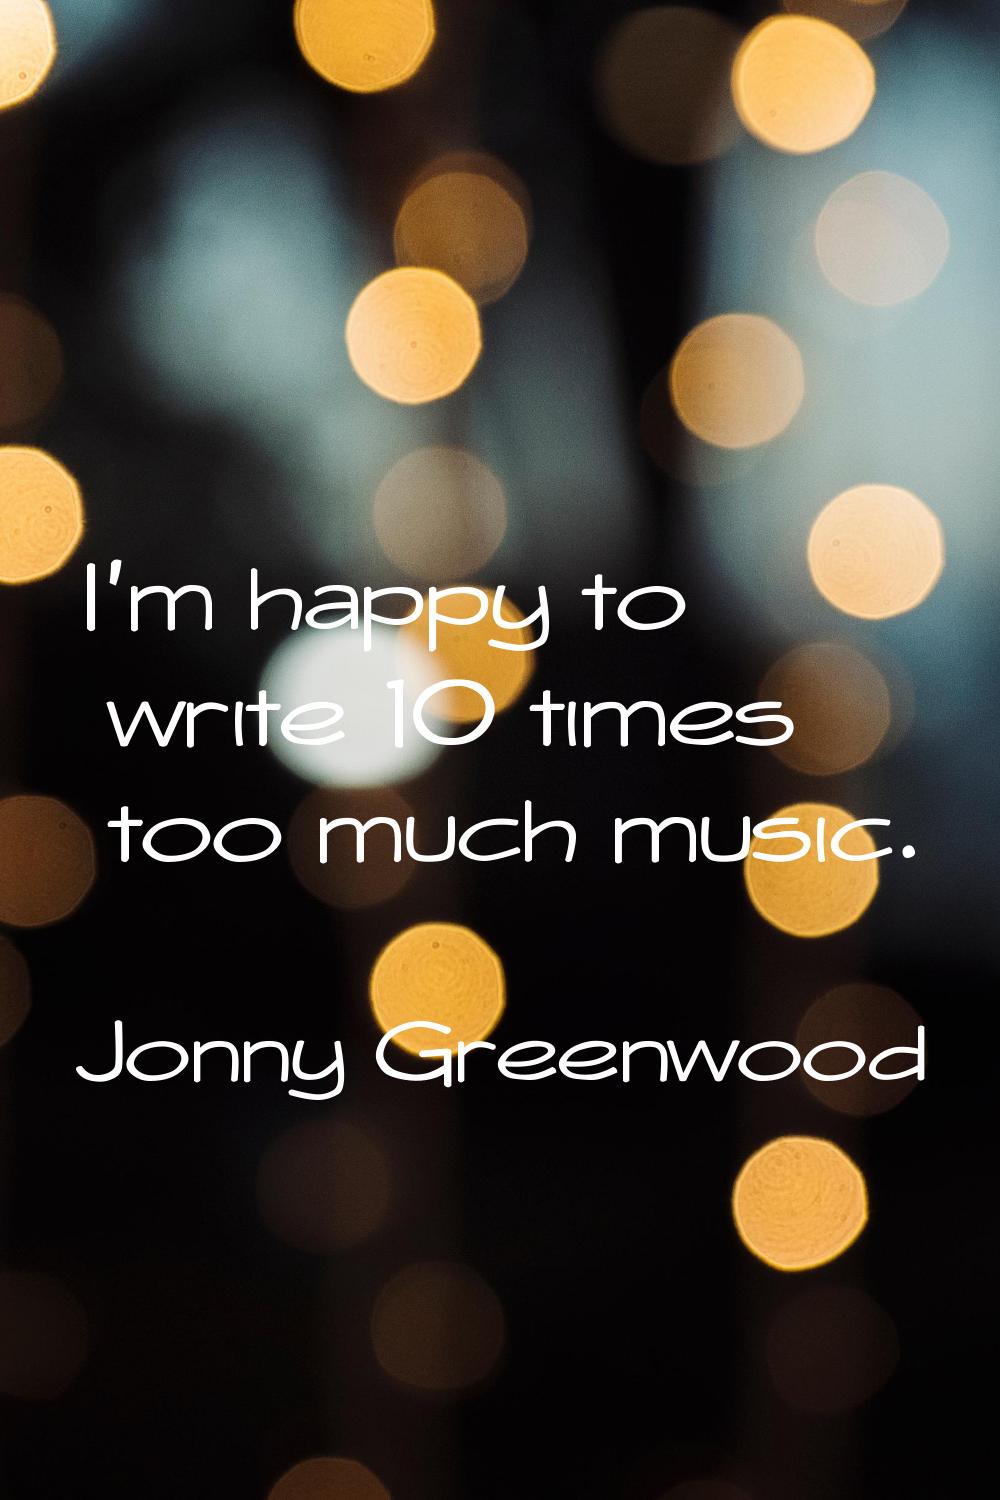 I'm happy to write 10 times too much music.